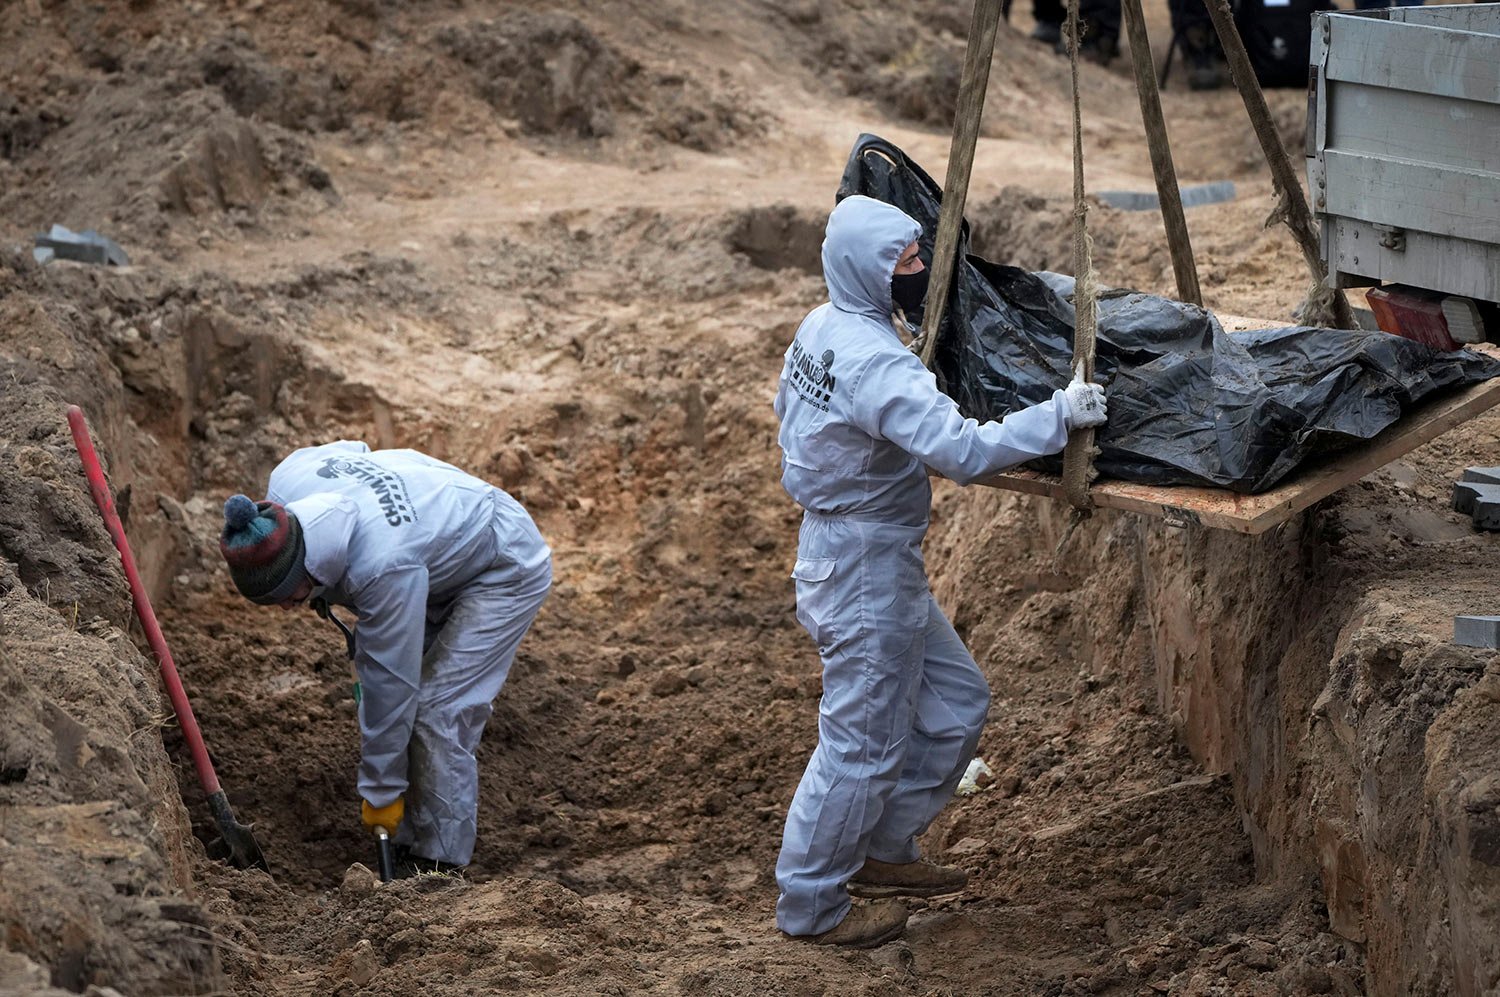  Men wearing protective gear exhume the bodies of civilians killed during the Russian occupation in Bucha, on the outskirts of Kyiv, Ukraine, Wednesday, April 13, 2022. (AP Photo/Efrem Lukatsky) 